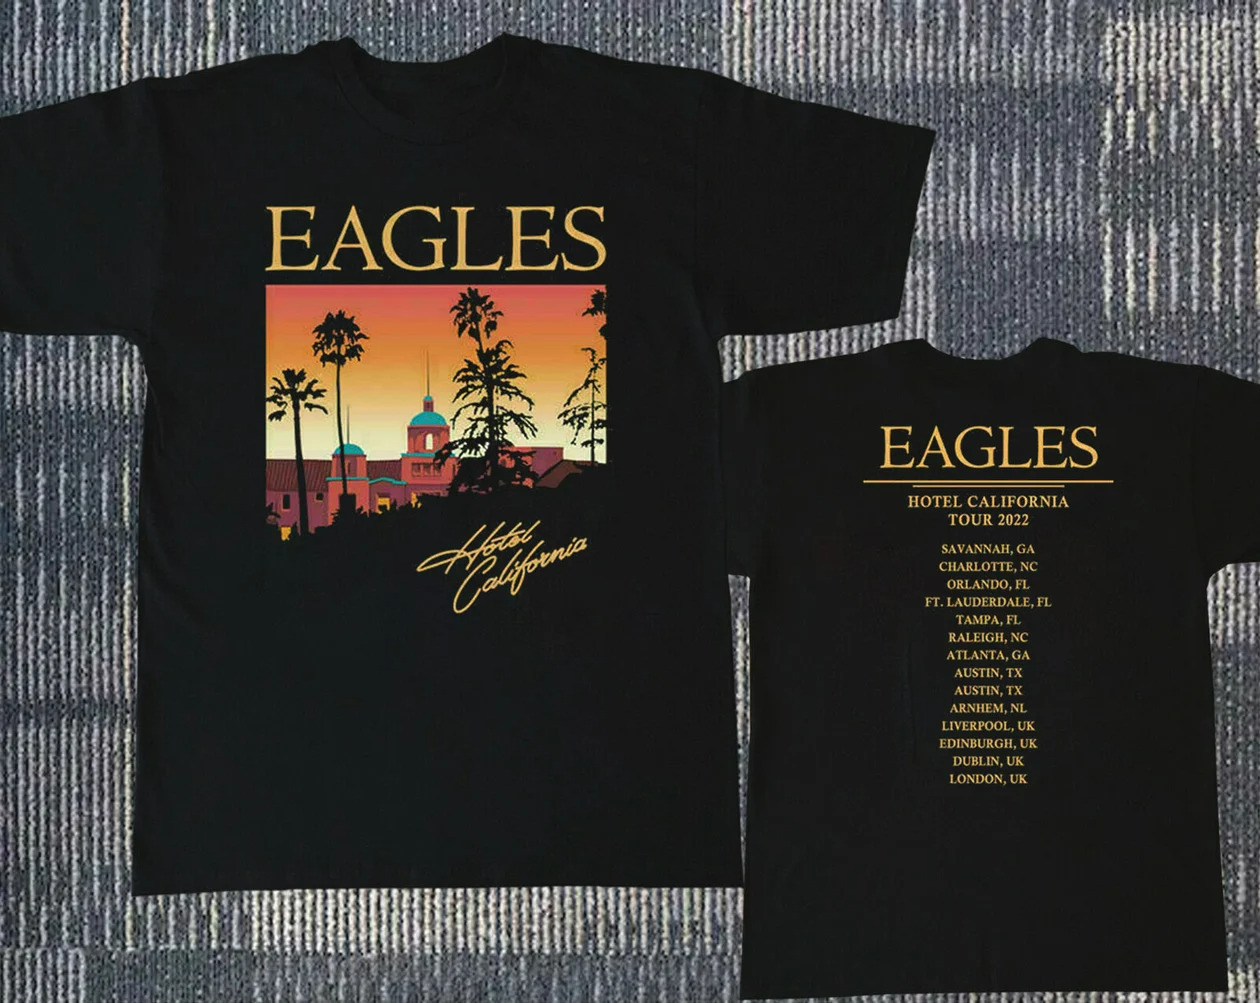 HOT!!! The Eagles Hotel California Tour Concert North America 2022 T-Shirt